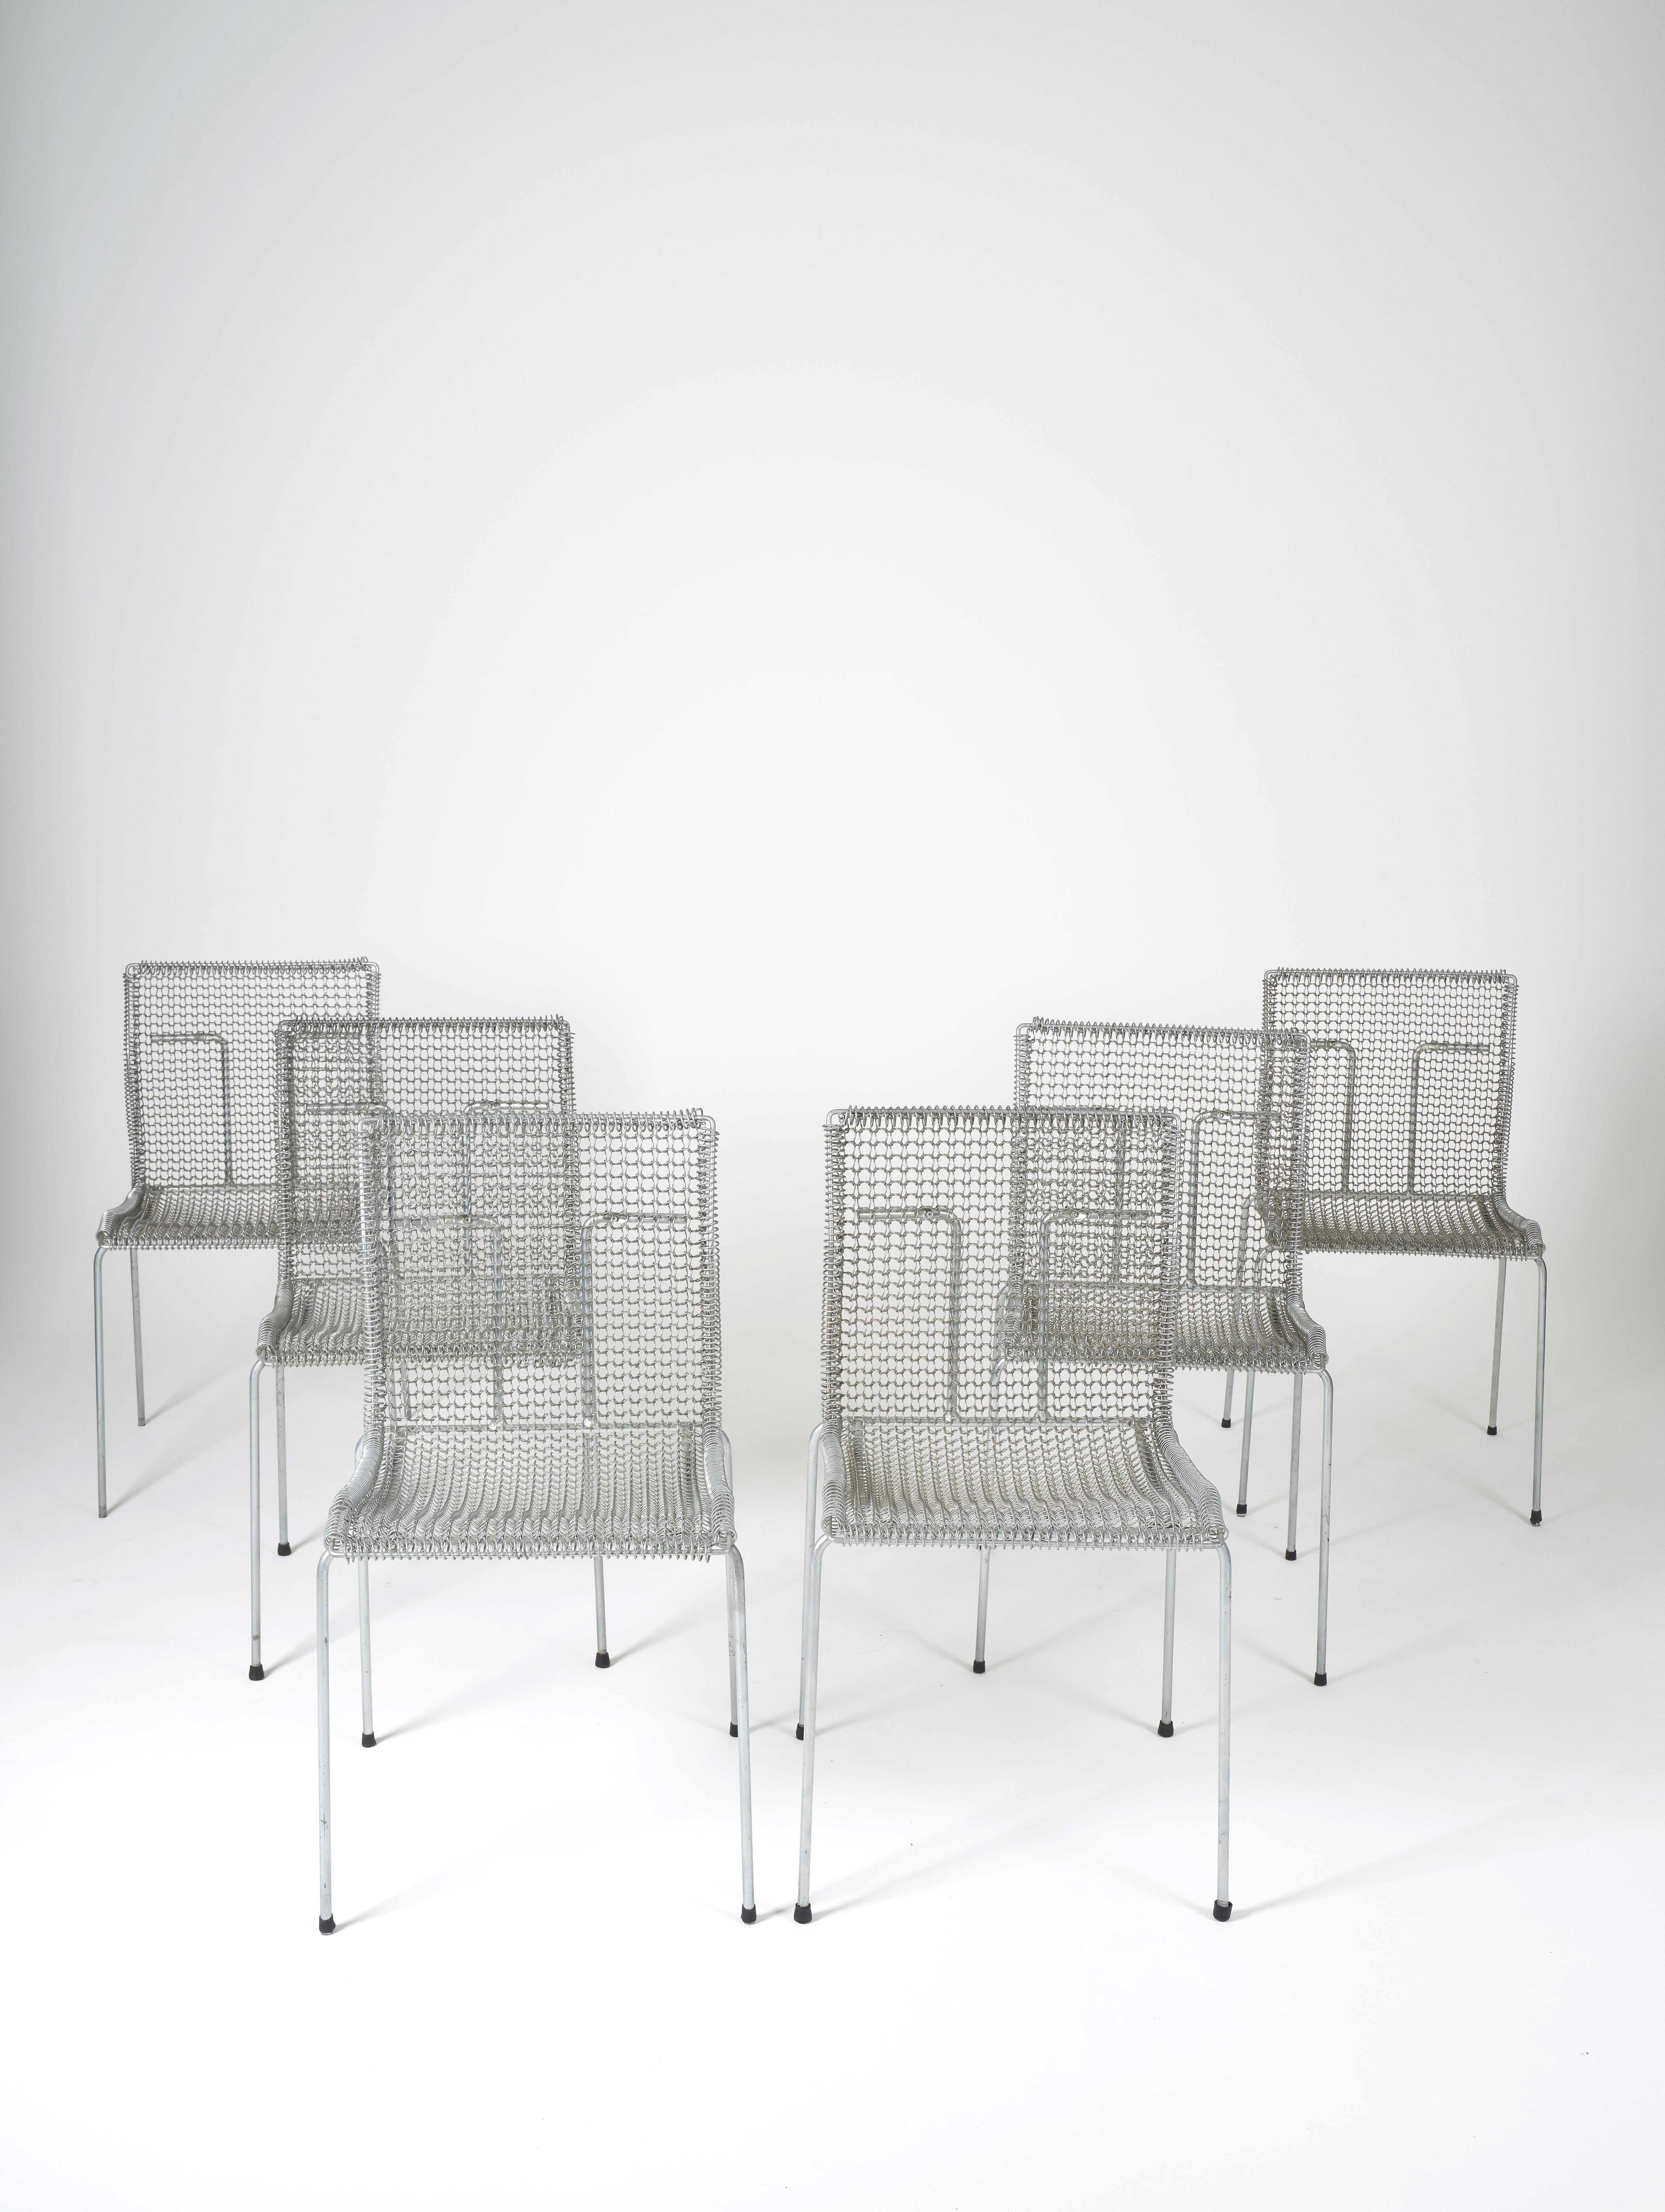 Extremely rare set of 6 timeless galvanized metal chairs by Niall O'Flynn for T Spectrum in 1997.